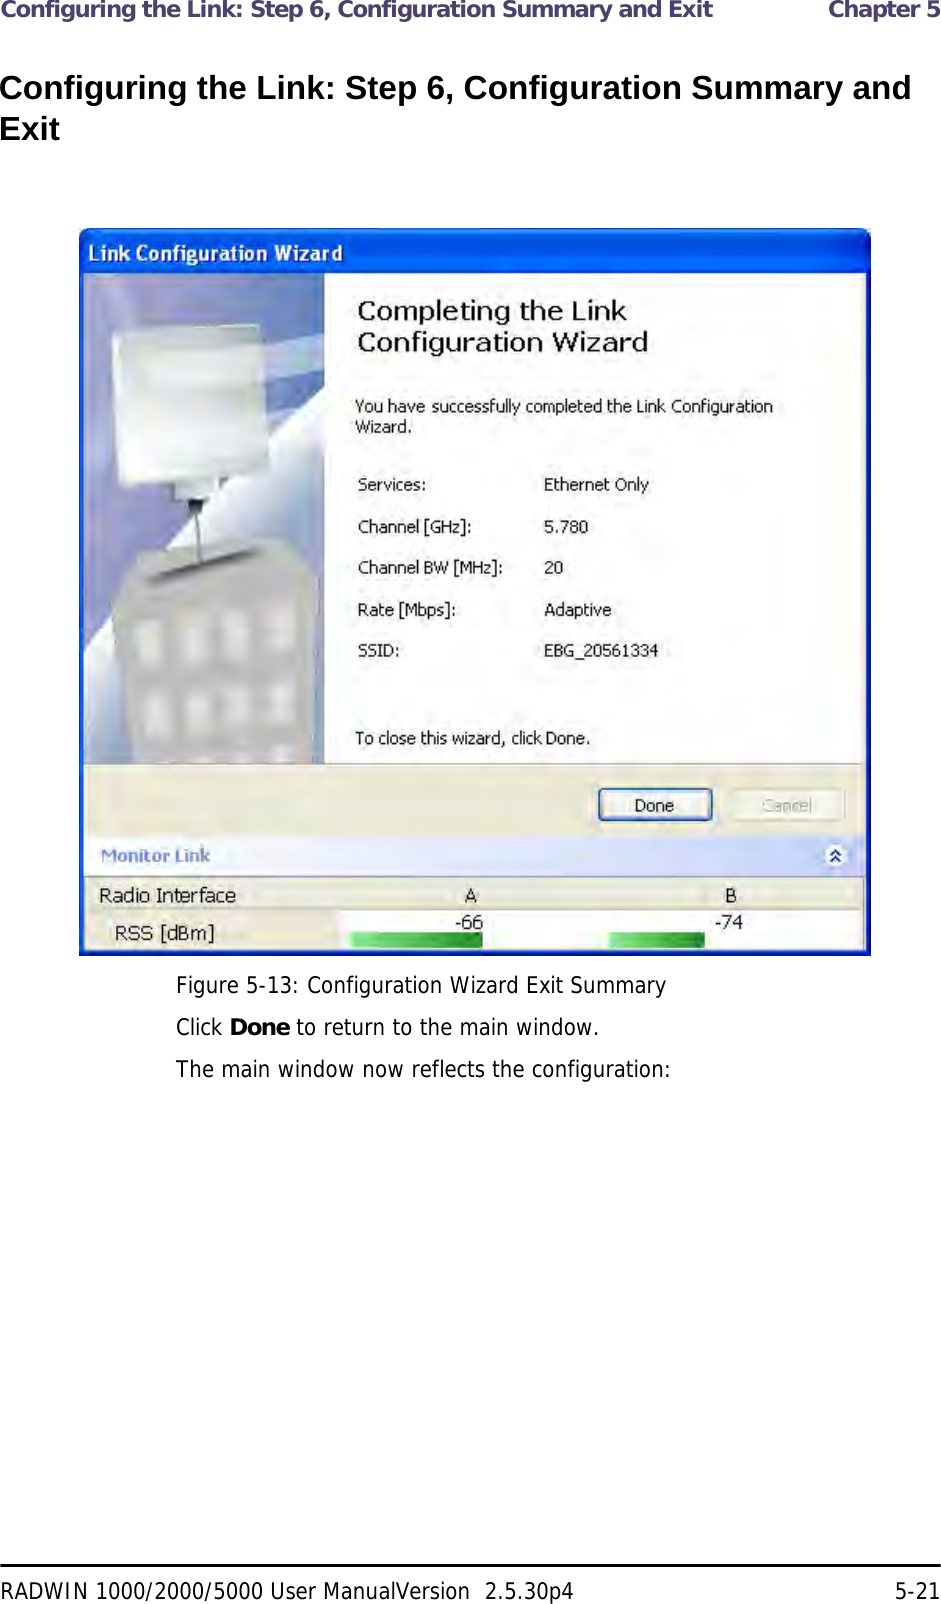 Configuring the Link: Step 6, Configuration Summary and Exit  Chapter 5RADWIN 1000/2000/5000 User ManualVersion  2.5.30p4 5-21Configuring the Link: Step 6, Configuration Summary and ExitFigure 5-13: Configuration Wizard Exit Summary Click Done to return to the main window.The main window now reflects the configuration: